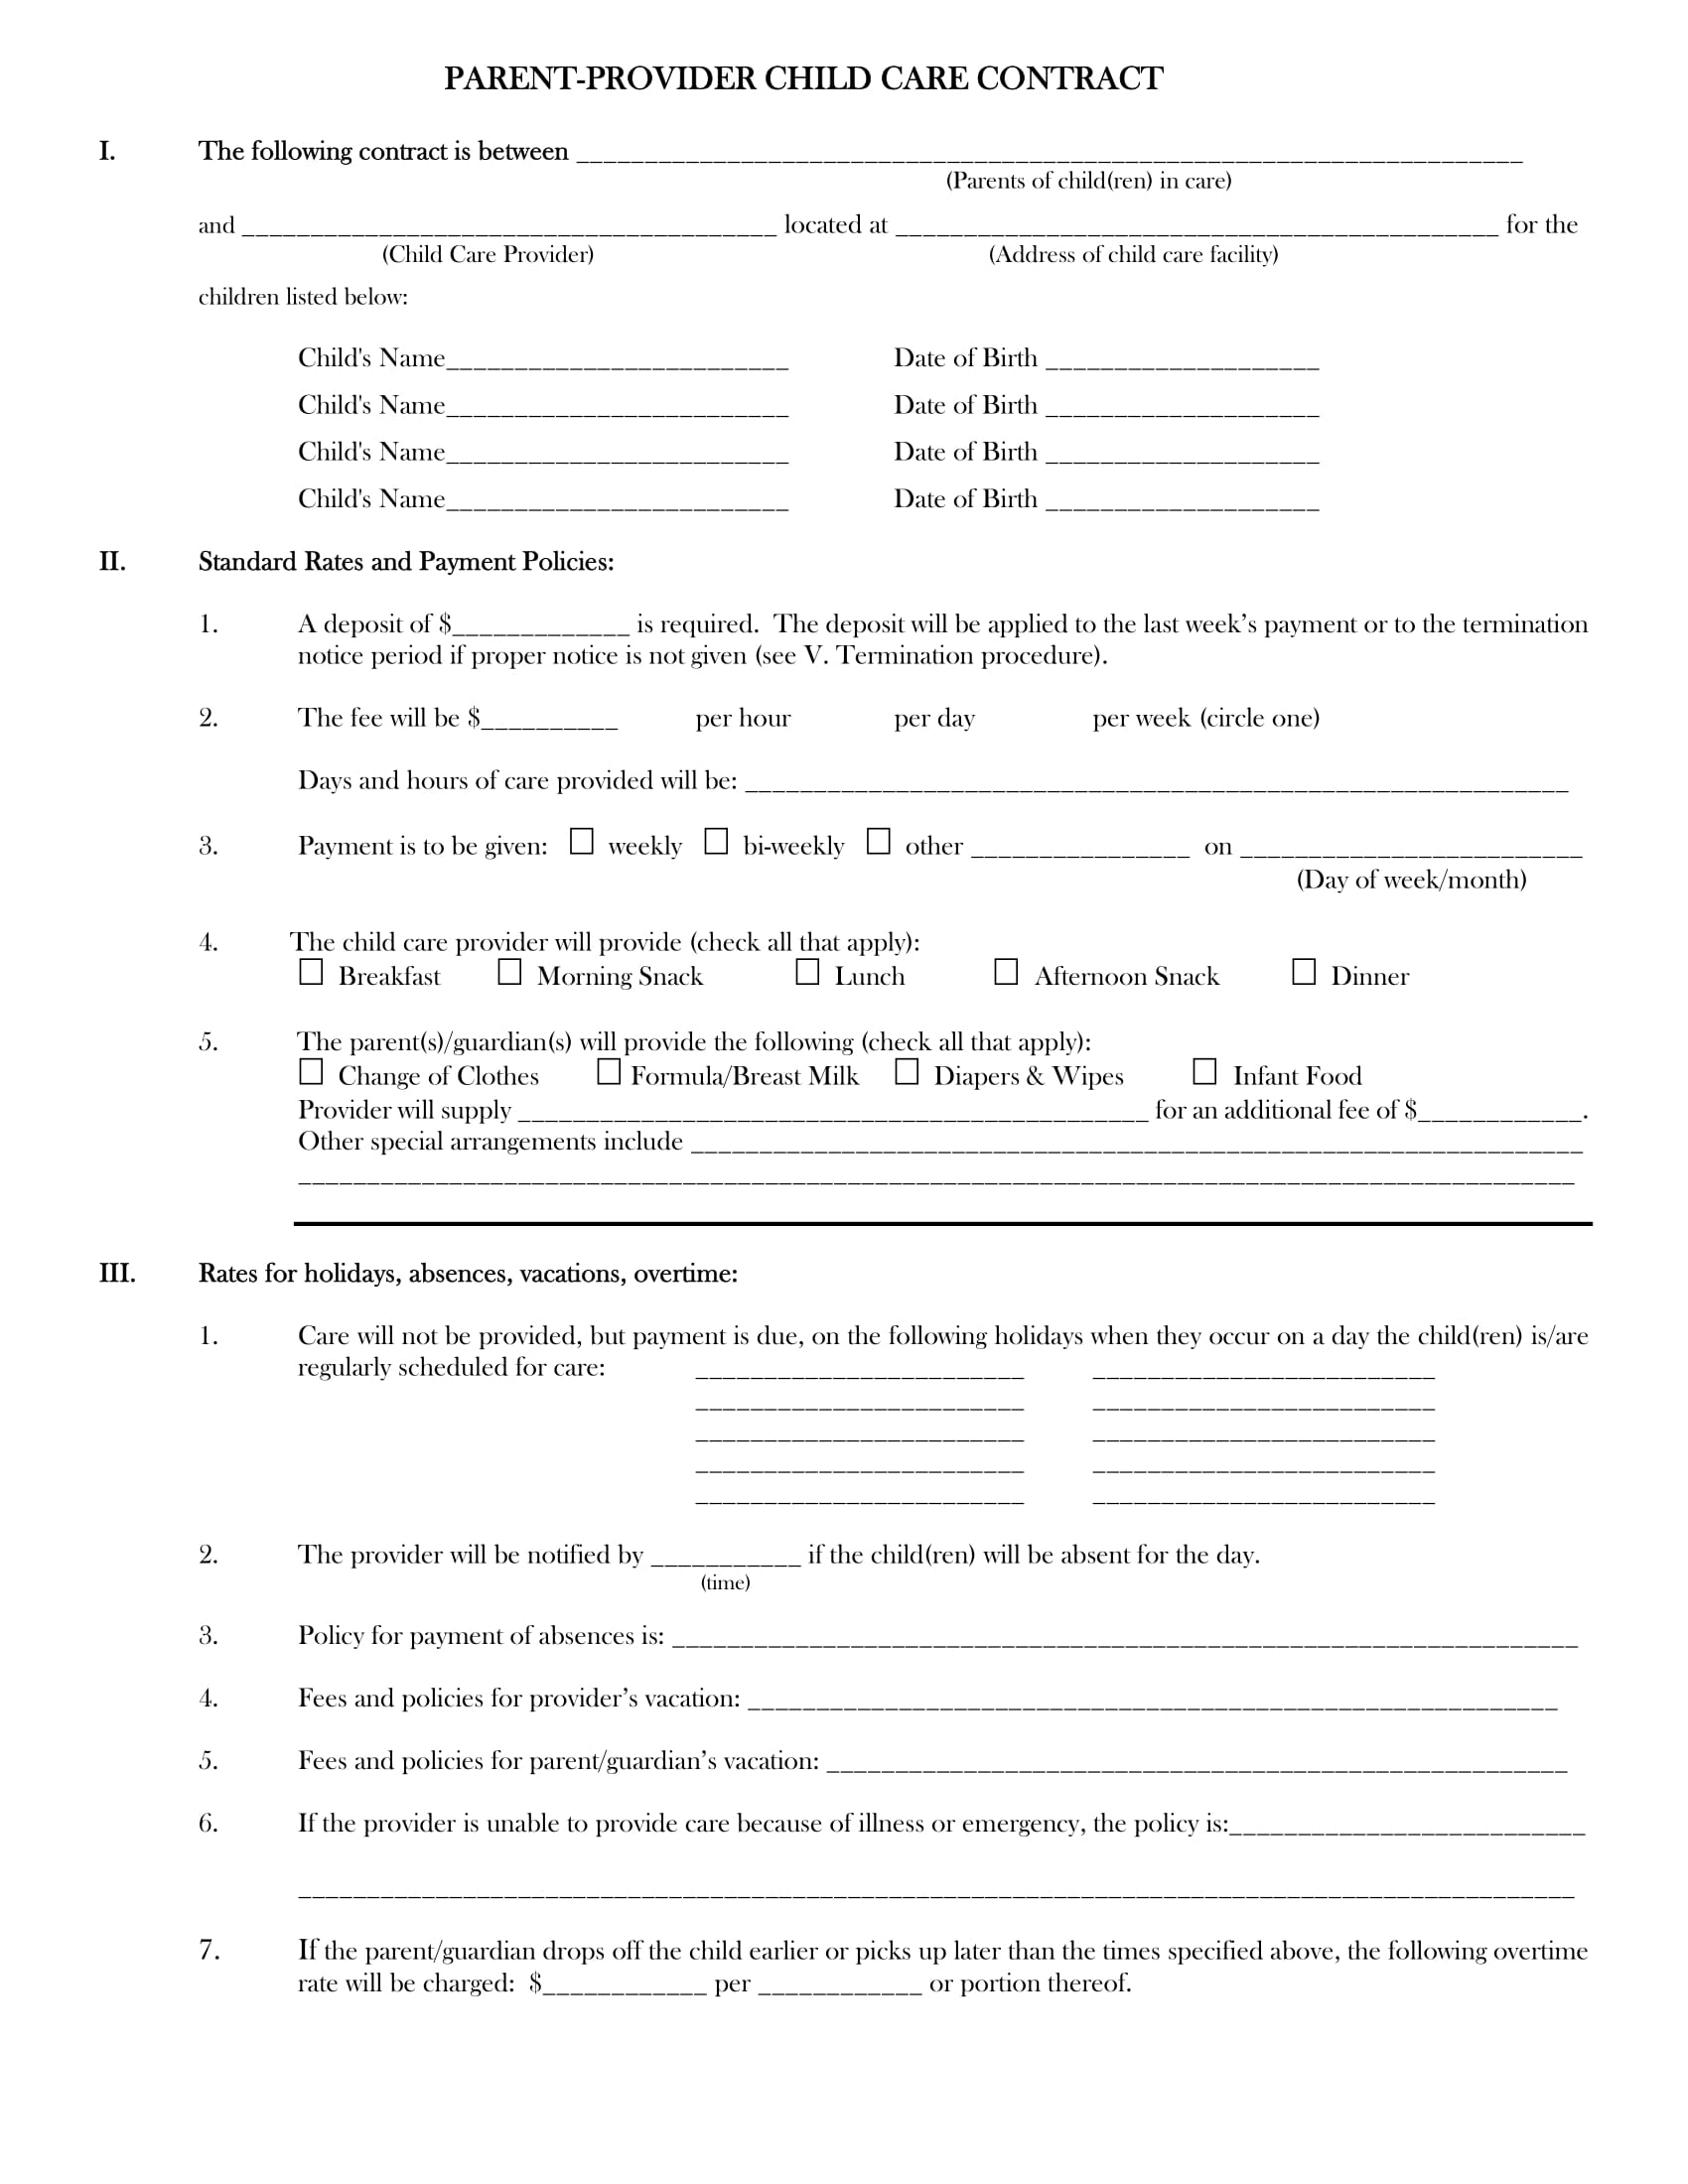 parent provider child care contract